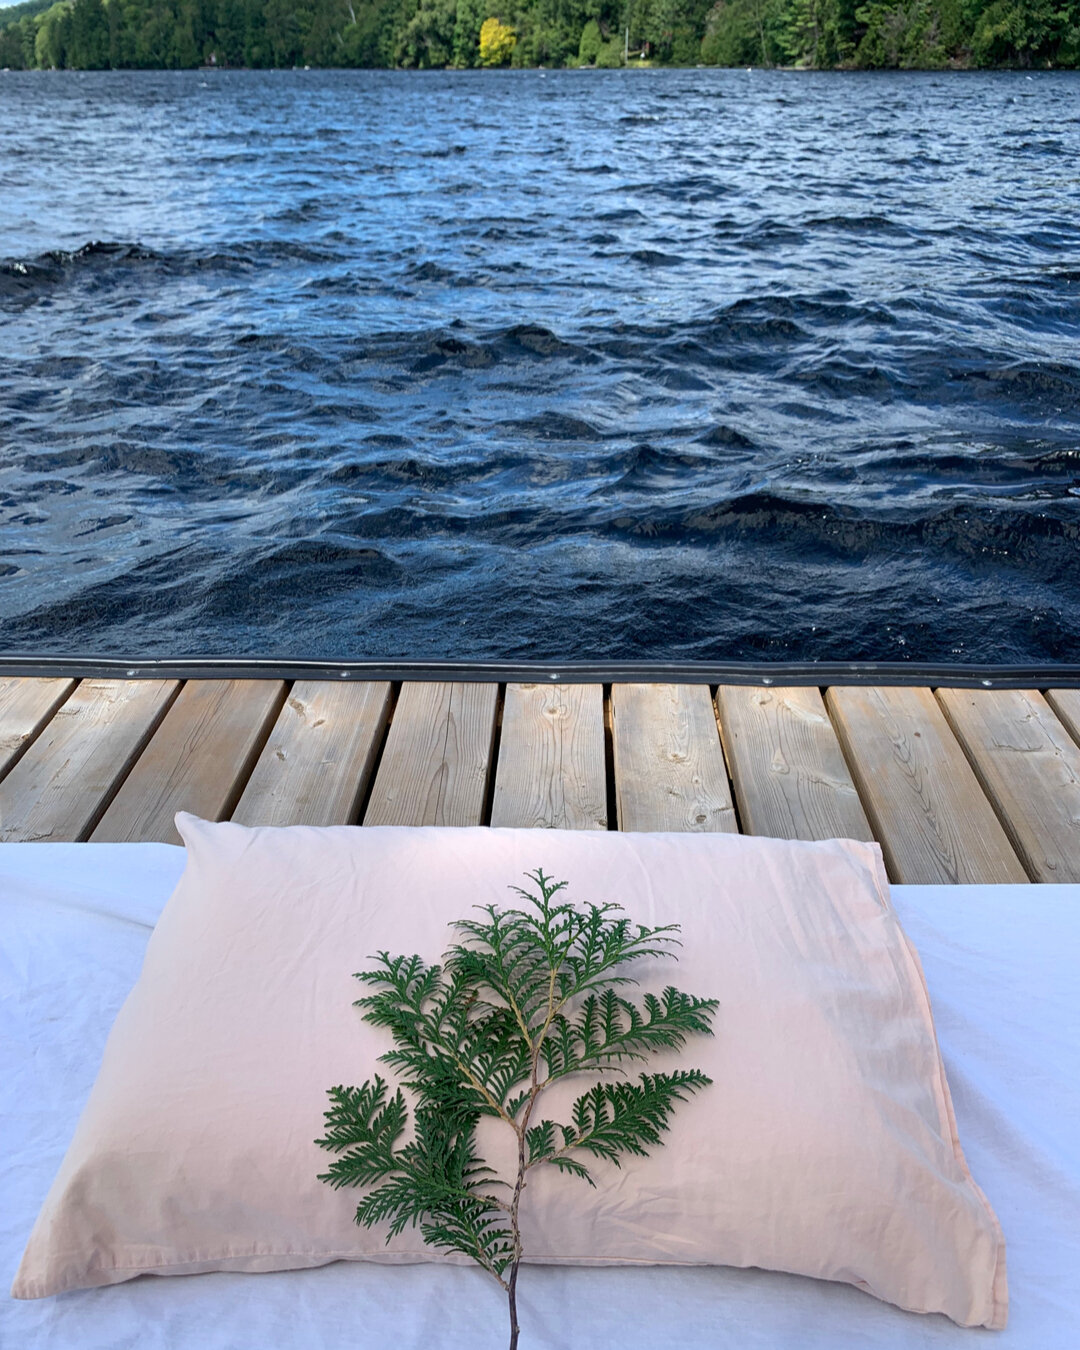 Did you know Ms Jane travels to cottage country? If you're planning a cottage trip, make it even more restful and enjoyable by having a Thai Massage in front of the fire, on the dock, or surrounded by trees. There is almost nothing more magical and r